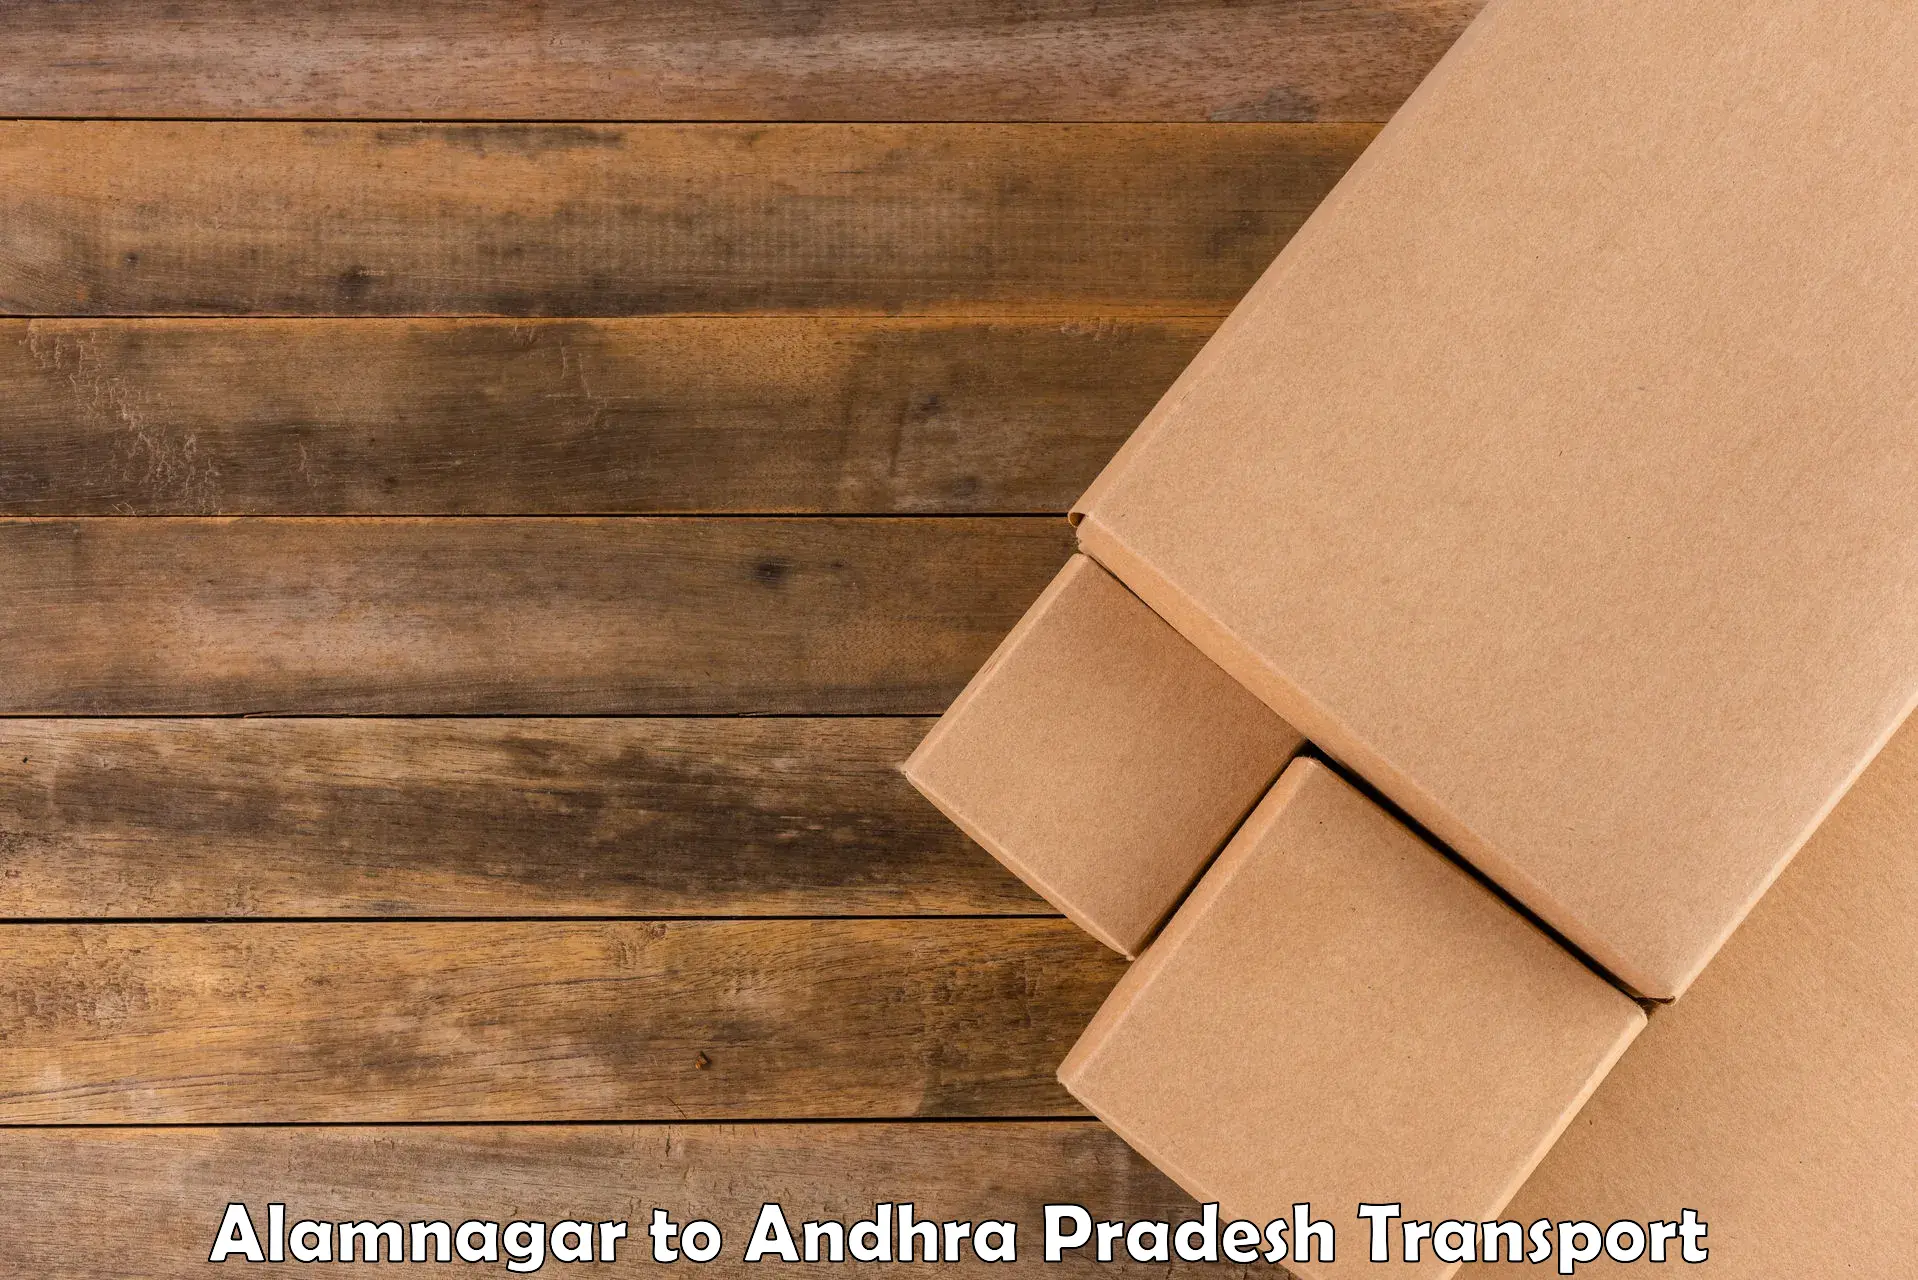 Air freight transport services in Alamnagar to Bapatla